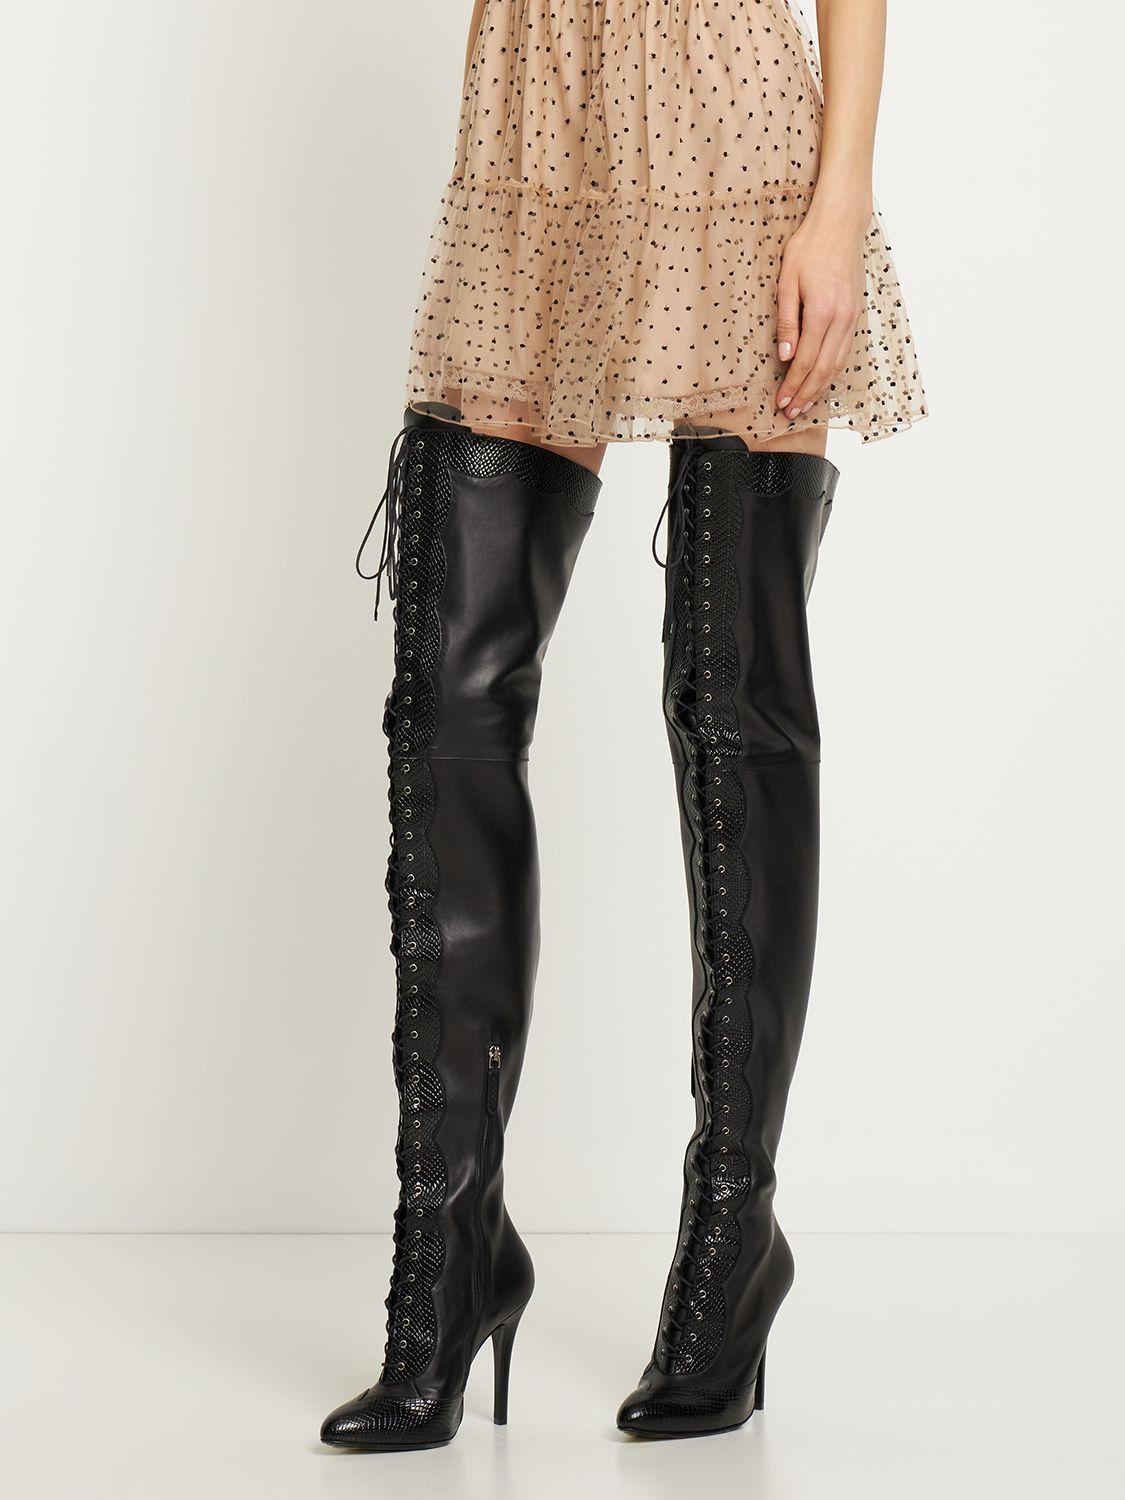 Gucci Zumi Leather Knee-high Boot in Black